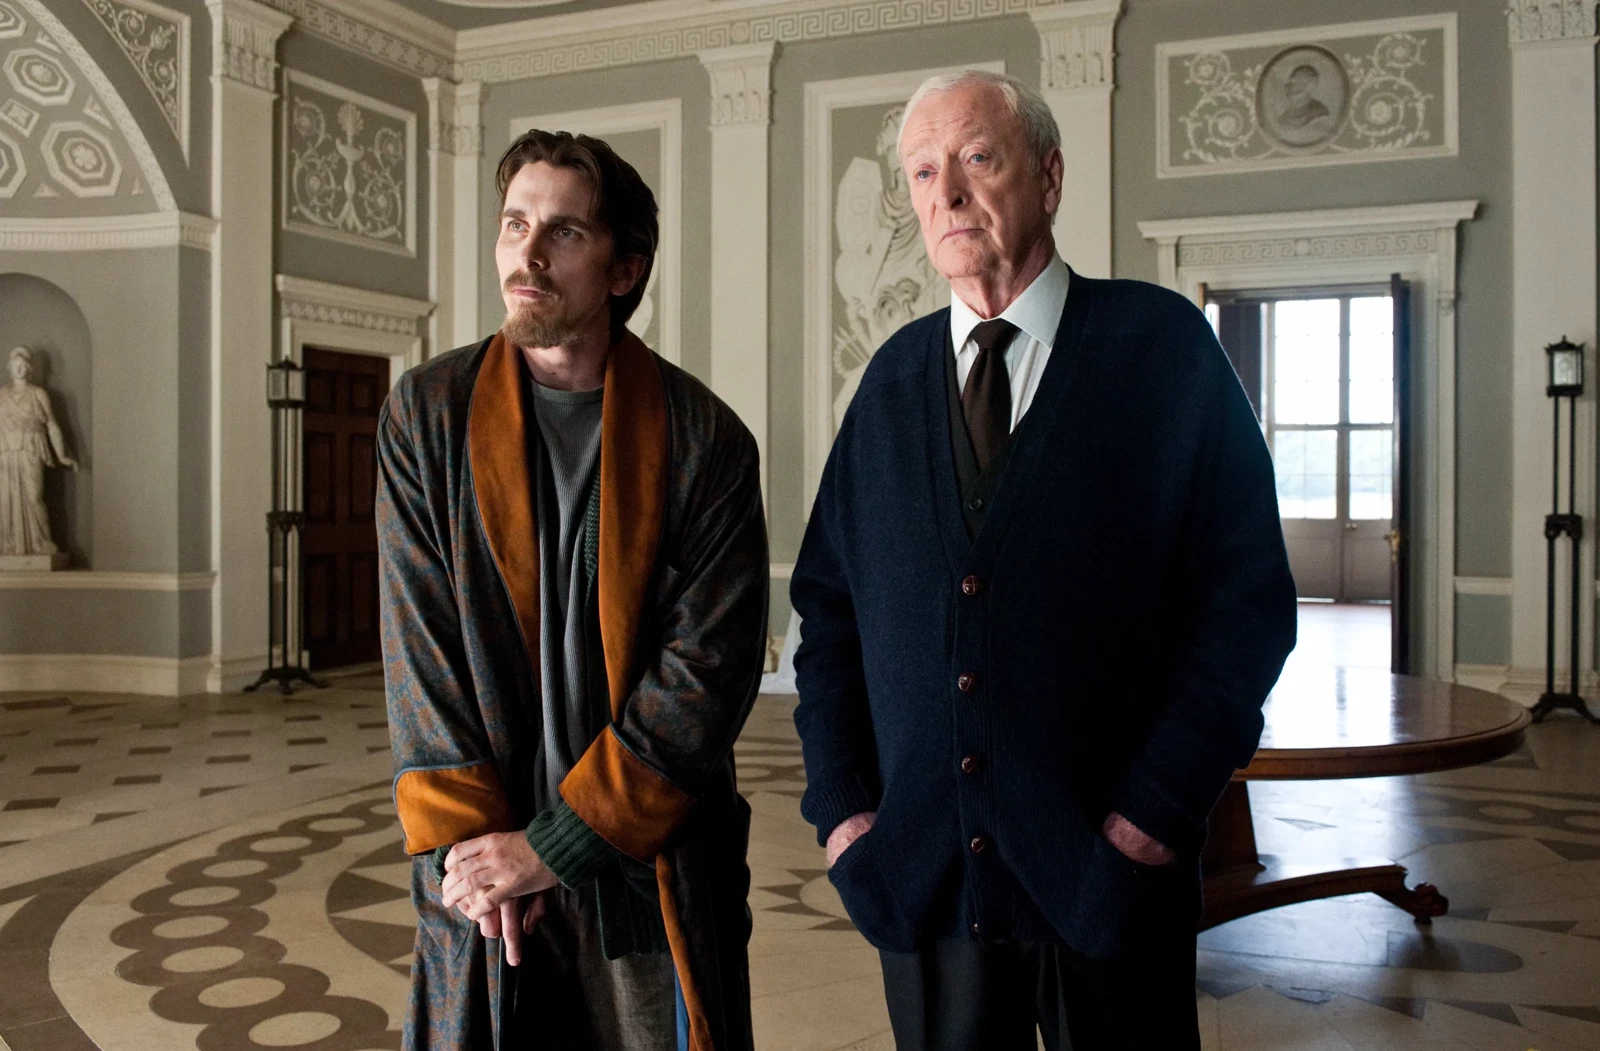 Christian Bale and Michael Caine in The Dark Knight Rises